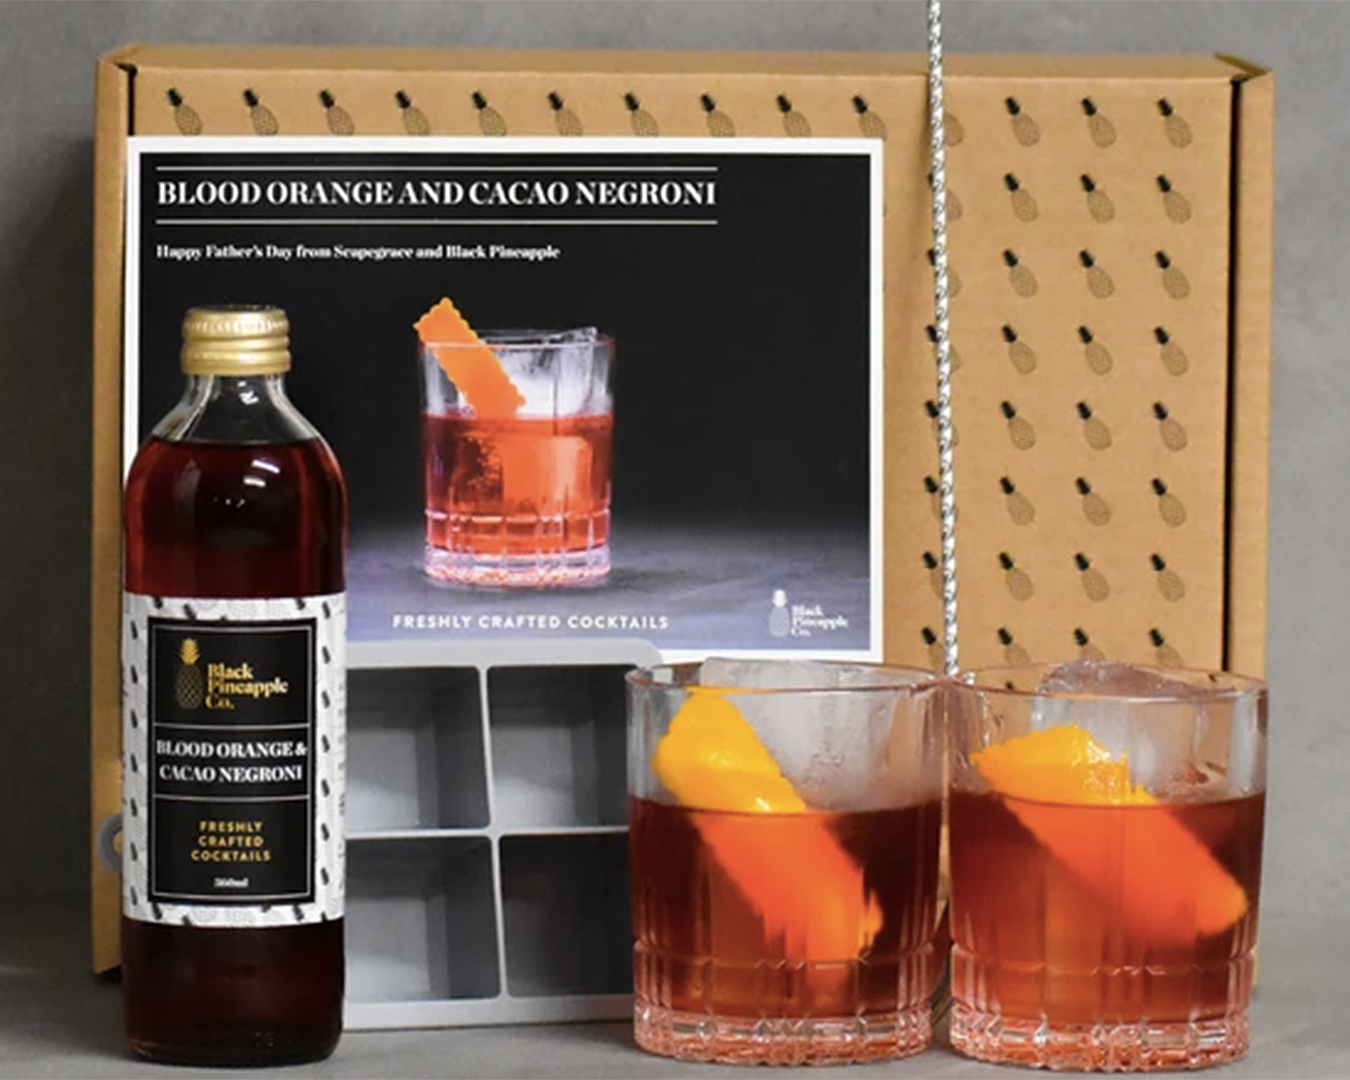 Blood Orange and Cacao Negroni kit from Black Pineapple.